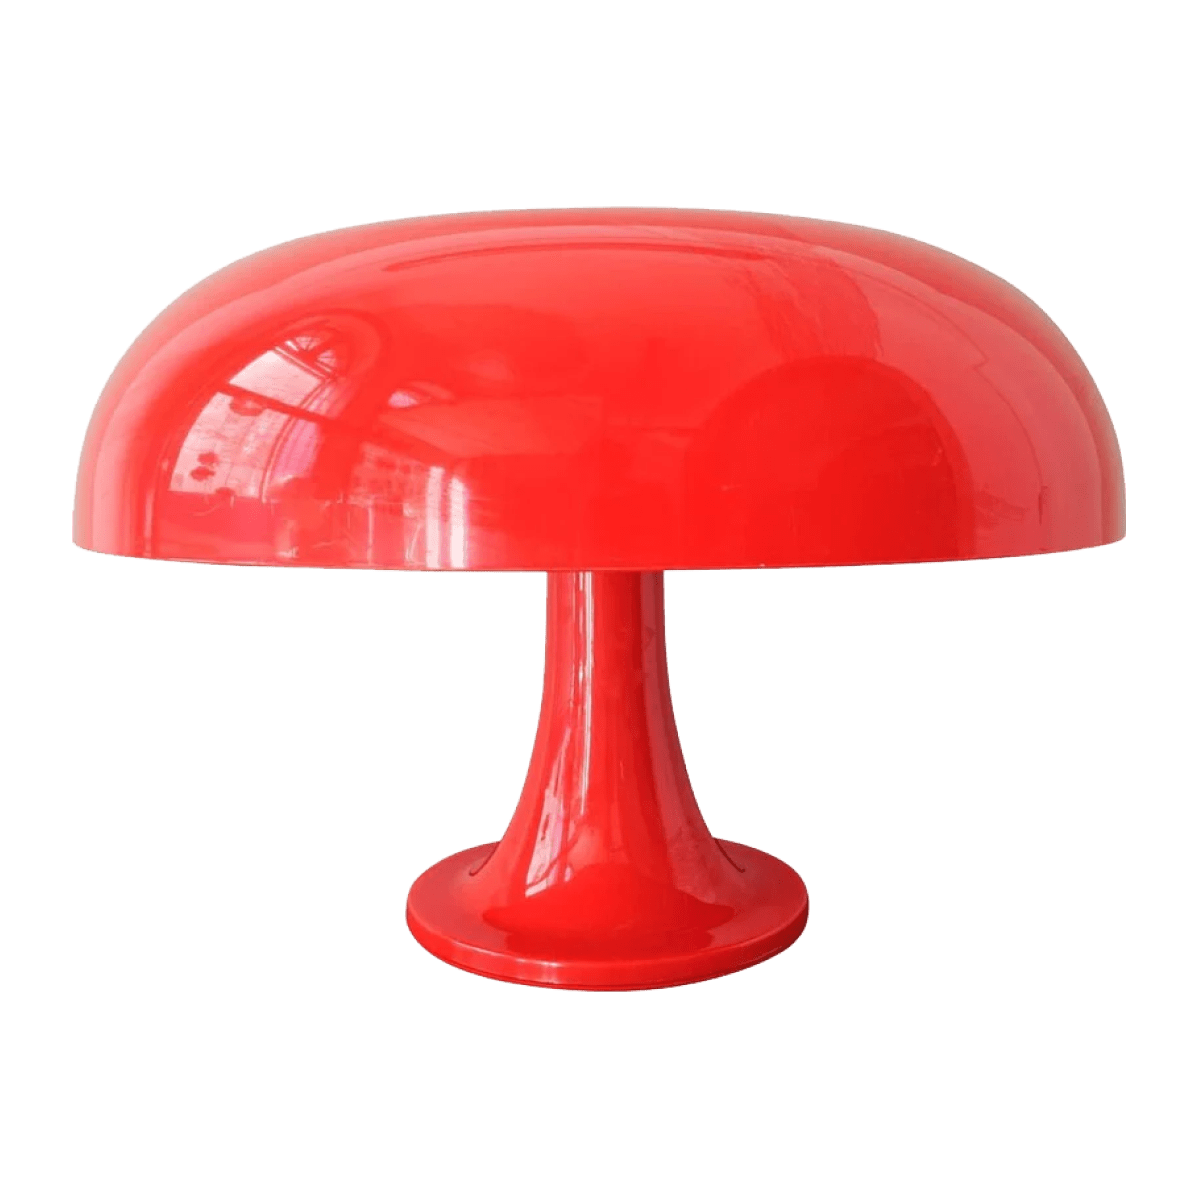 Classic red Nessino lamp from Artemide